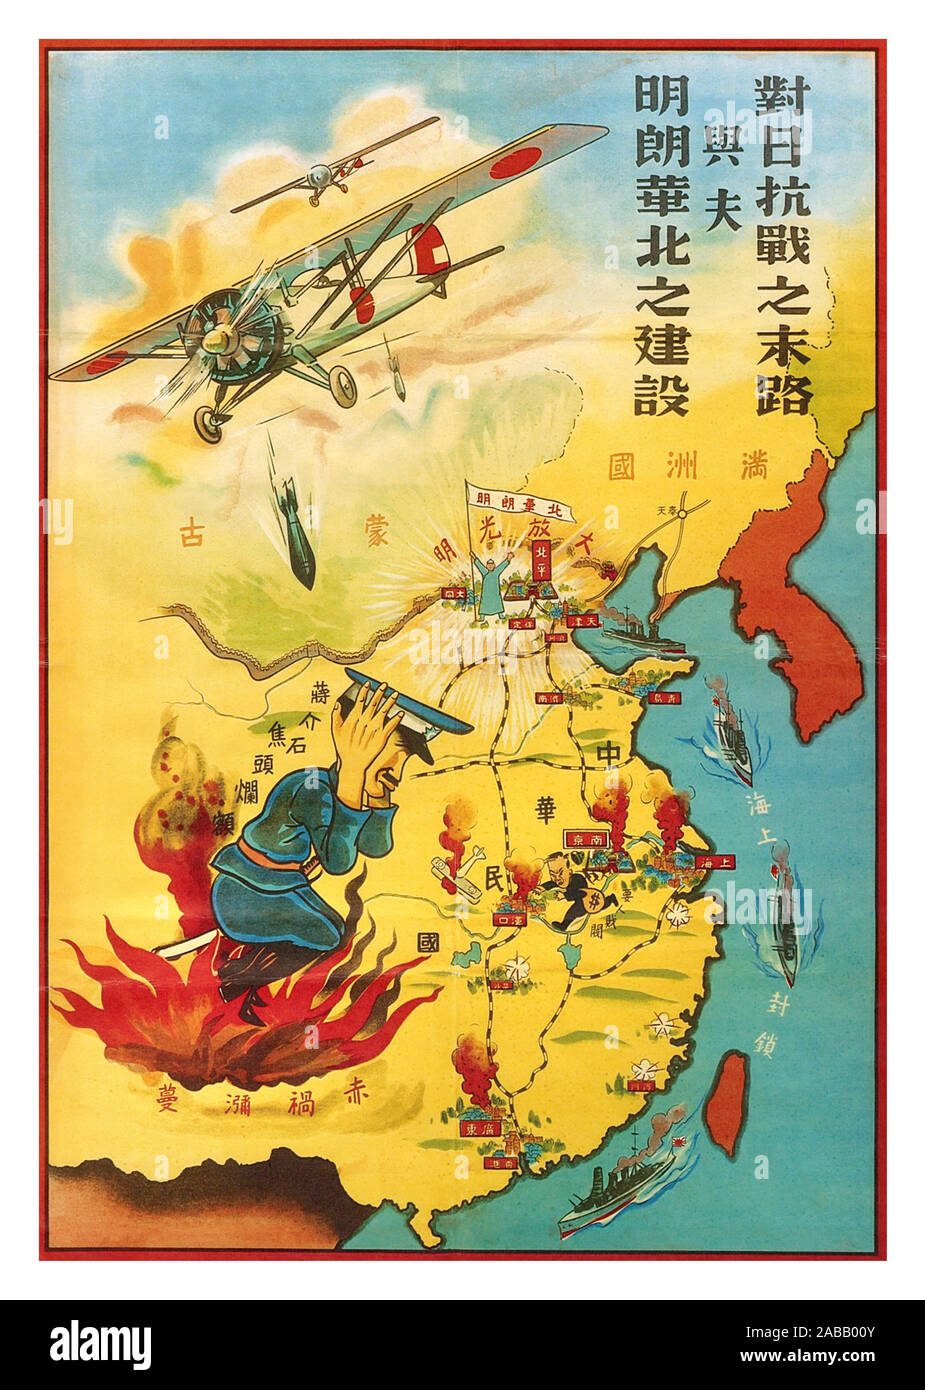 Vintage WW2 Japanese Propaganda Poster Map [Last Days of the Japanese War - Construction of a Liberated North China]. In the best-known raid, on June 5, 1941, some 4,000 civilians were asphyxiated in an air-raid shelter tunnel. This map was likely produced during that period. Because the text is in Chinese, it appears to be a Japanese effort to weaken the resolve of the Nationalists and their supporters. The figure cringing under the Japanese bombs falling on Western China is captioned “Chiang Kai-shek is embattled / bruised and battered.” Stock Photo